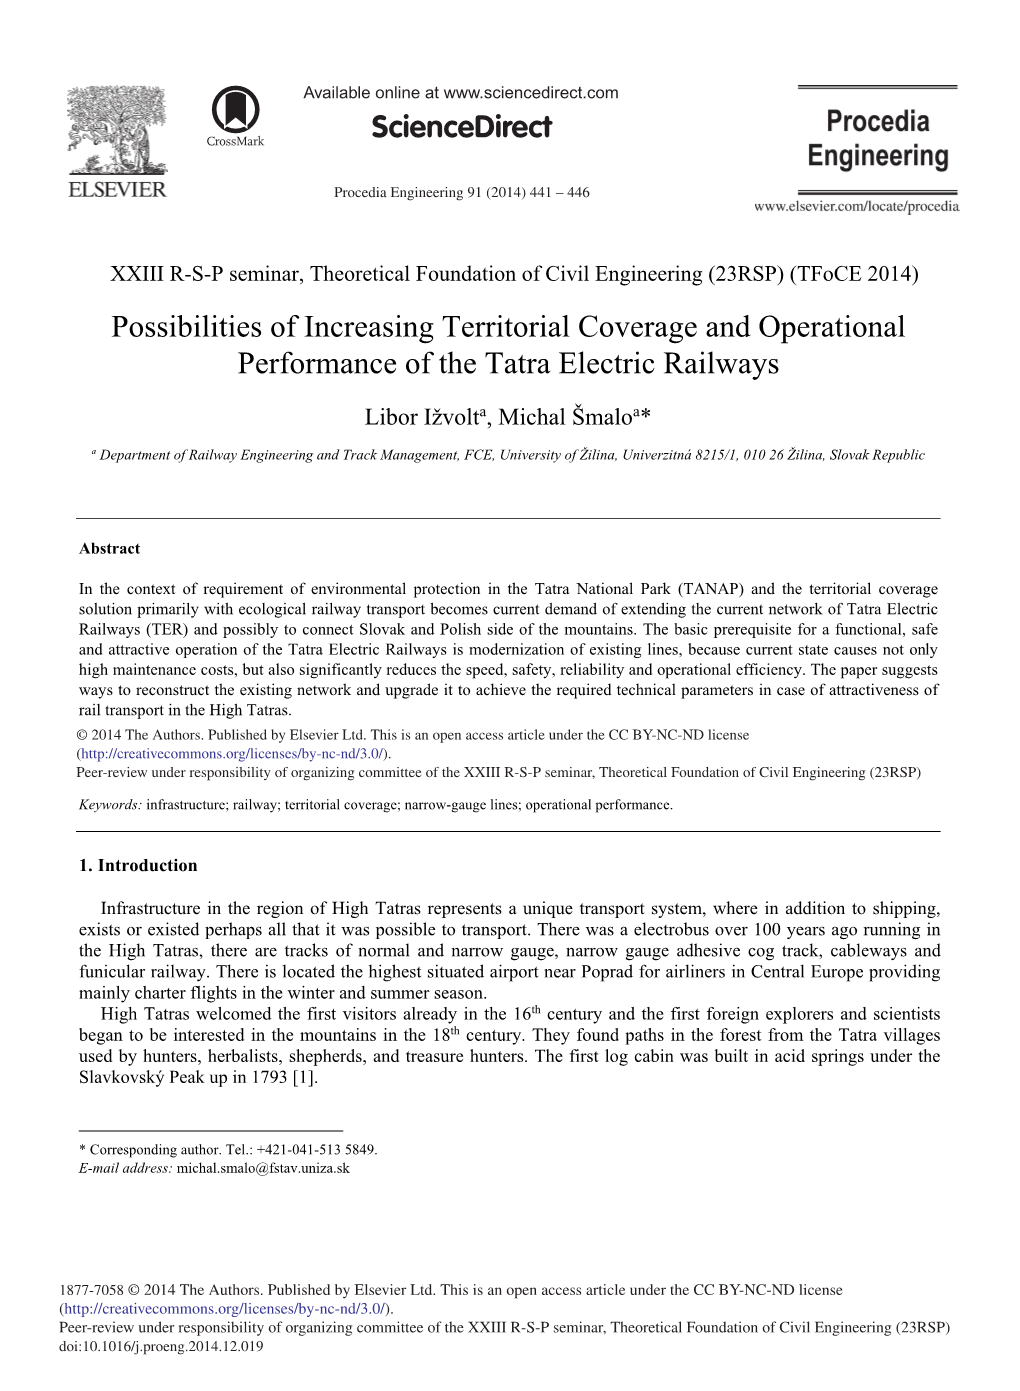 Possibilities of Increasing Territorial Coverage and Operational Performance of the Tatra Electric Railways